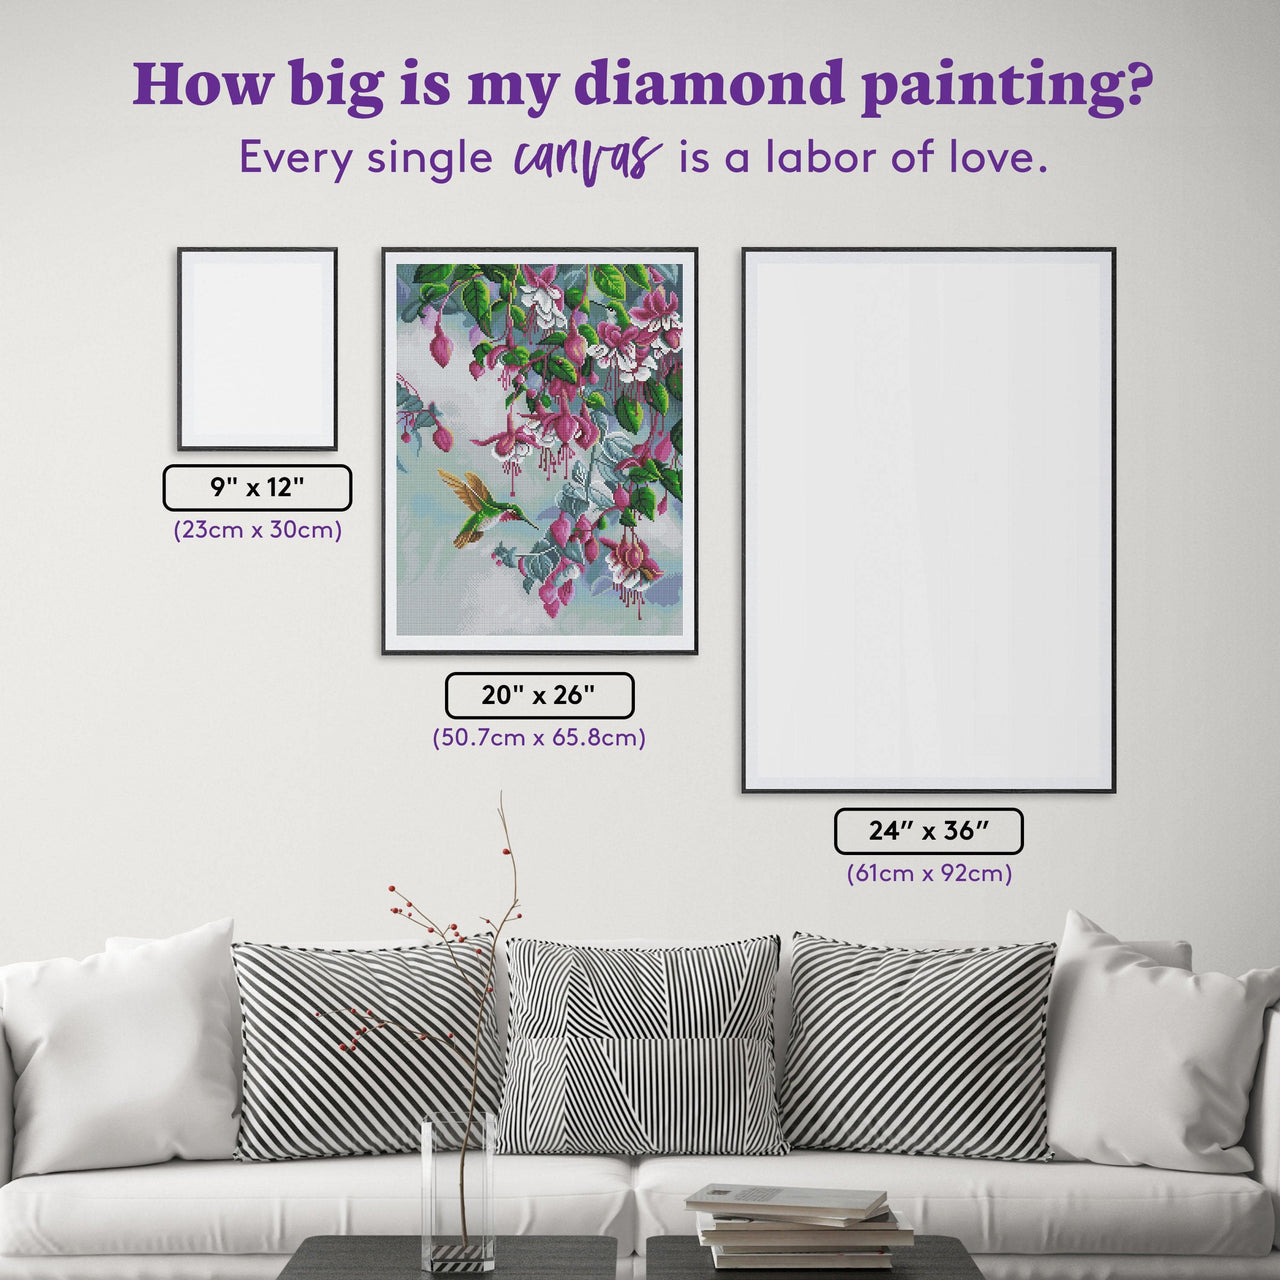 Diamond Painting Broadtail and Fuchsia 20" x 26" (50.7cm x 65.8cm) / Round with 43 Colors including 5 ABs / 42,535